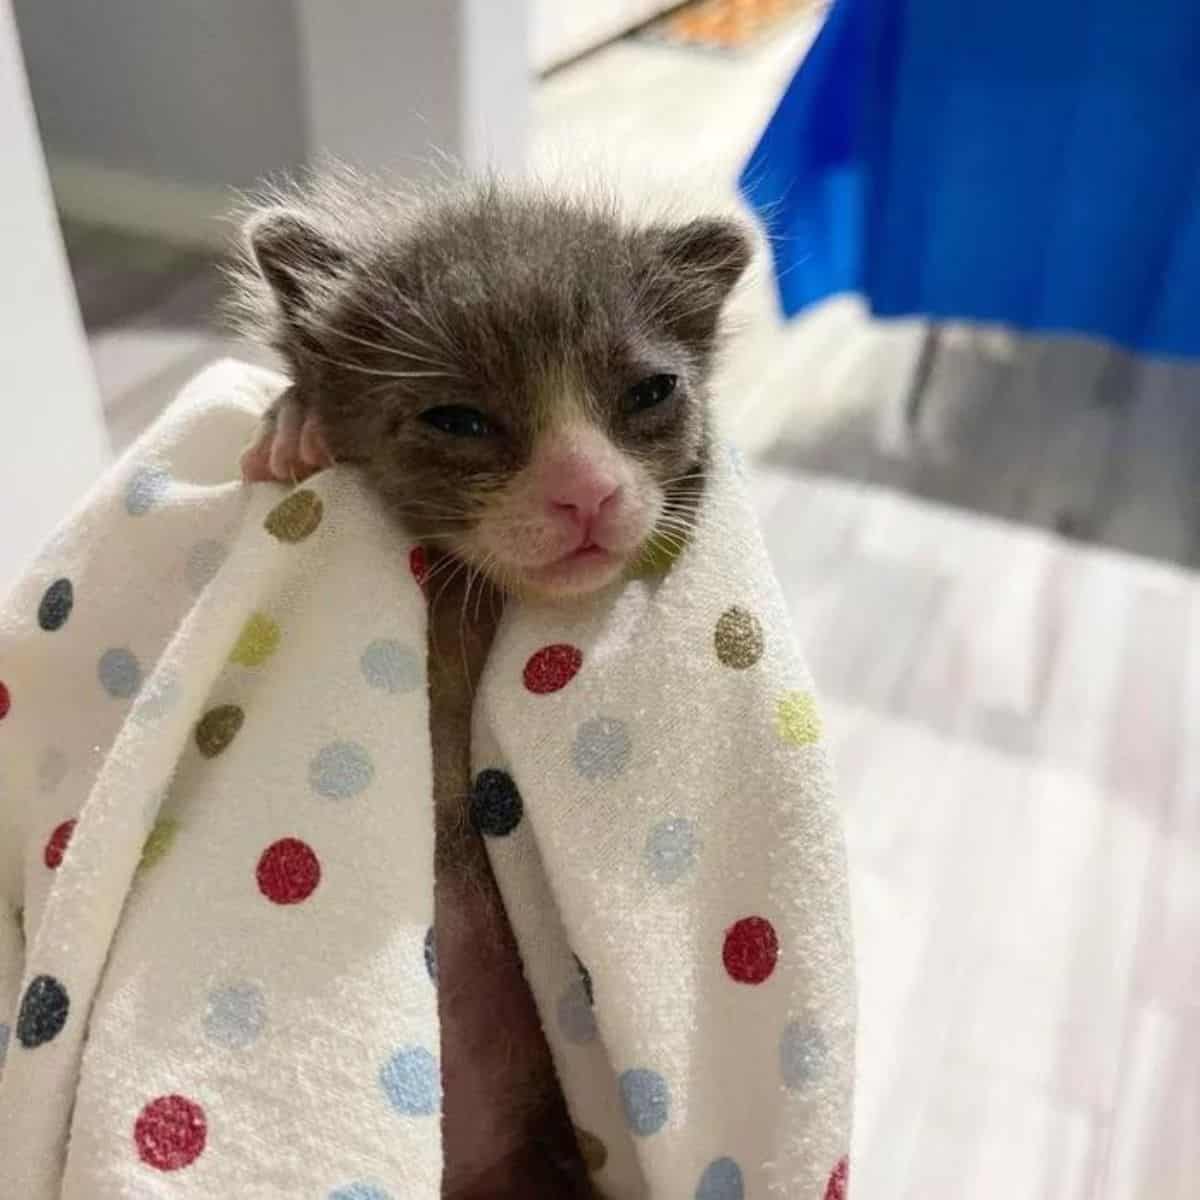 a kitten wrapped in a colorful towel